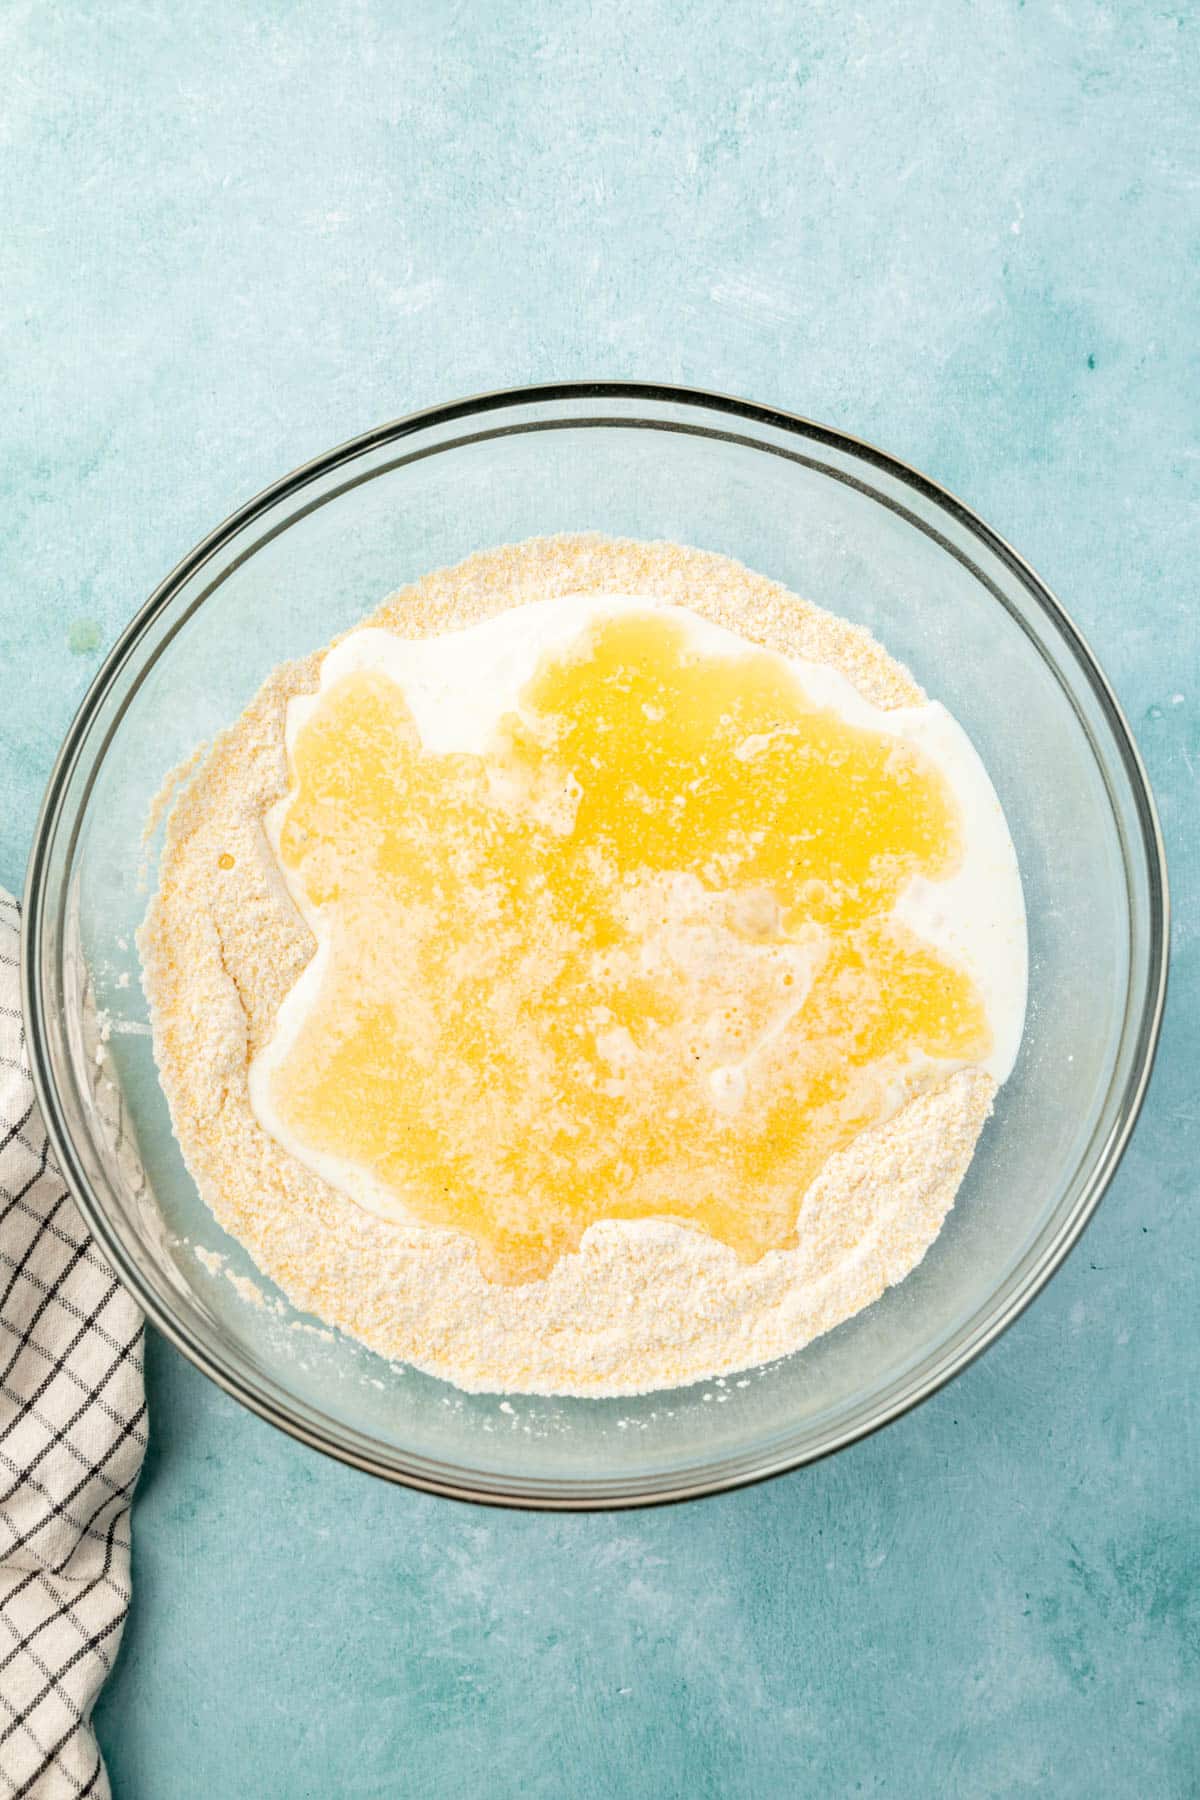 A glass mixing bowl with dry ingredients for cornmeal topped with buttermilk, whisked eggs, and melted butter.